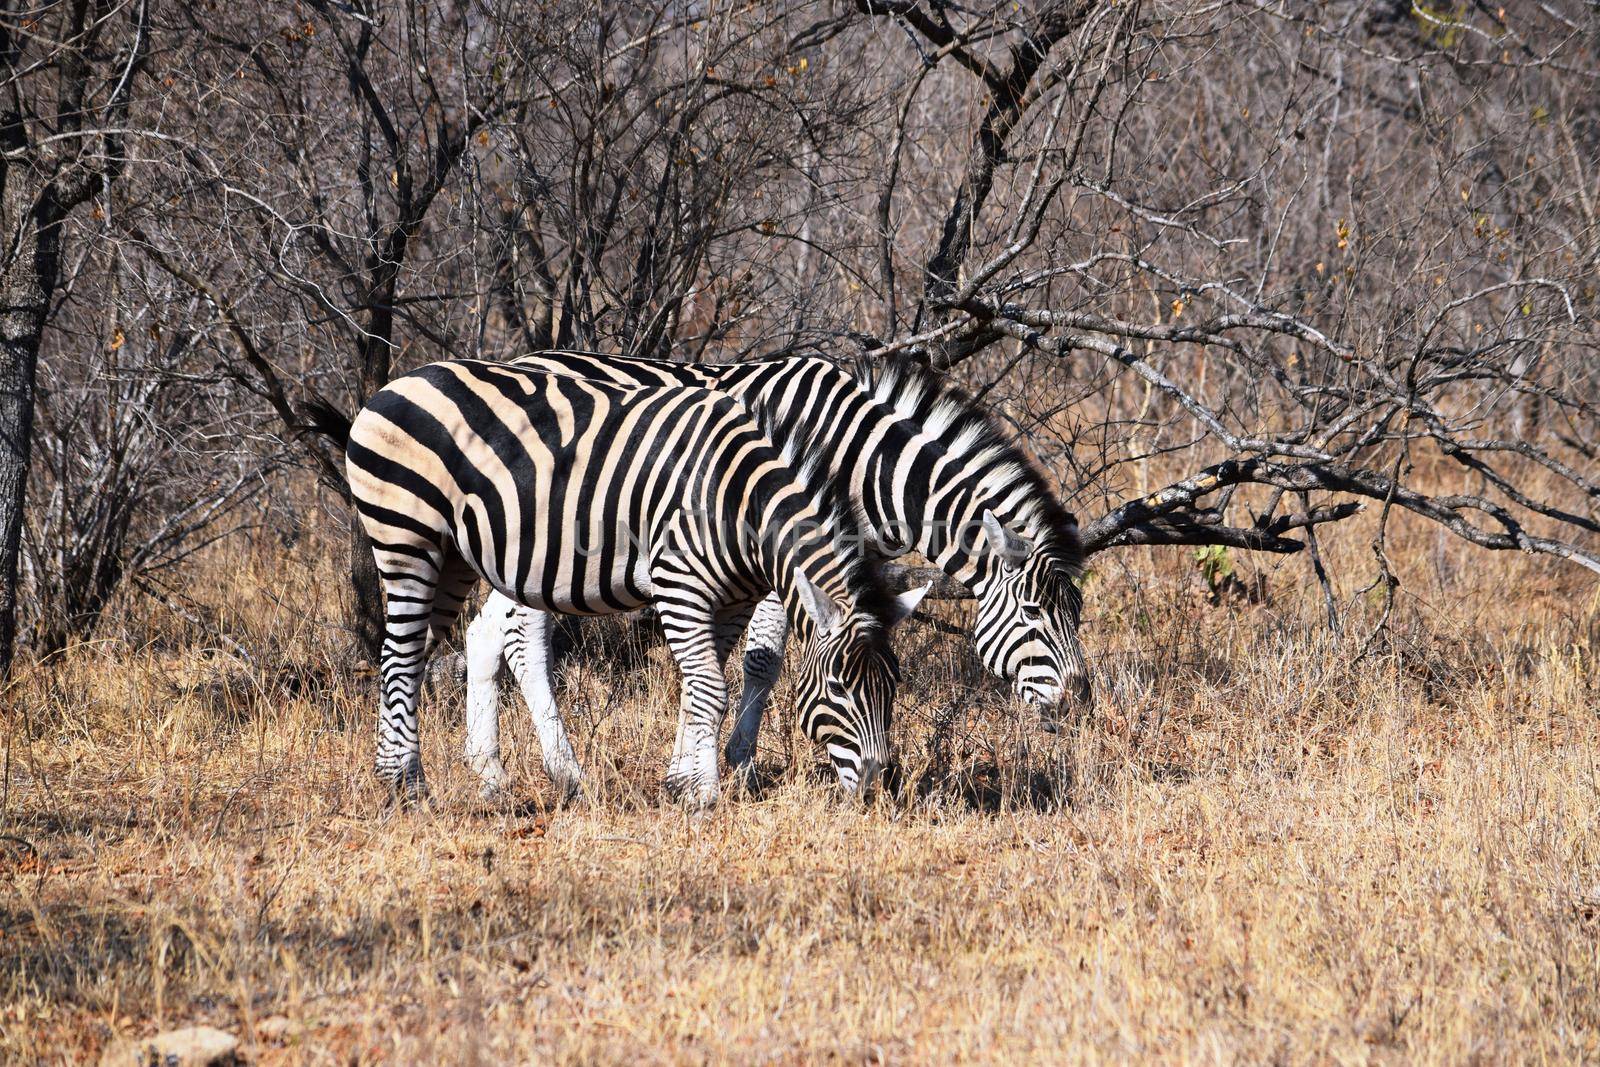 Small group of zebras grazing in Kruger National Park by silentstock639